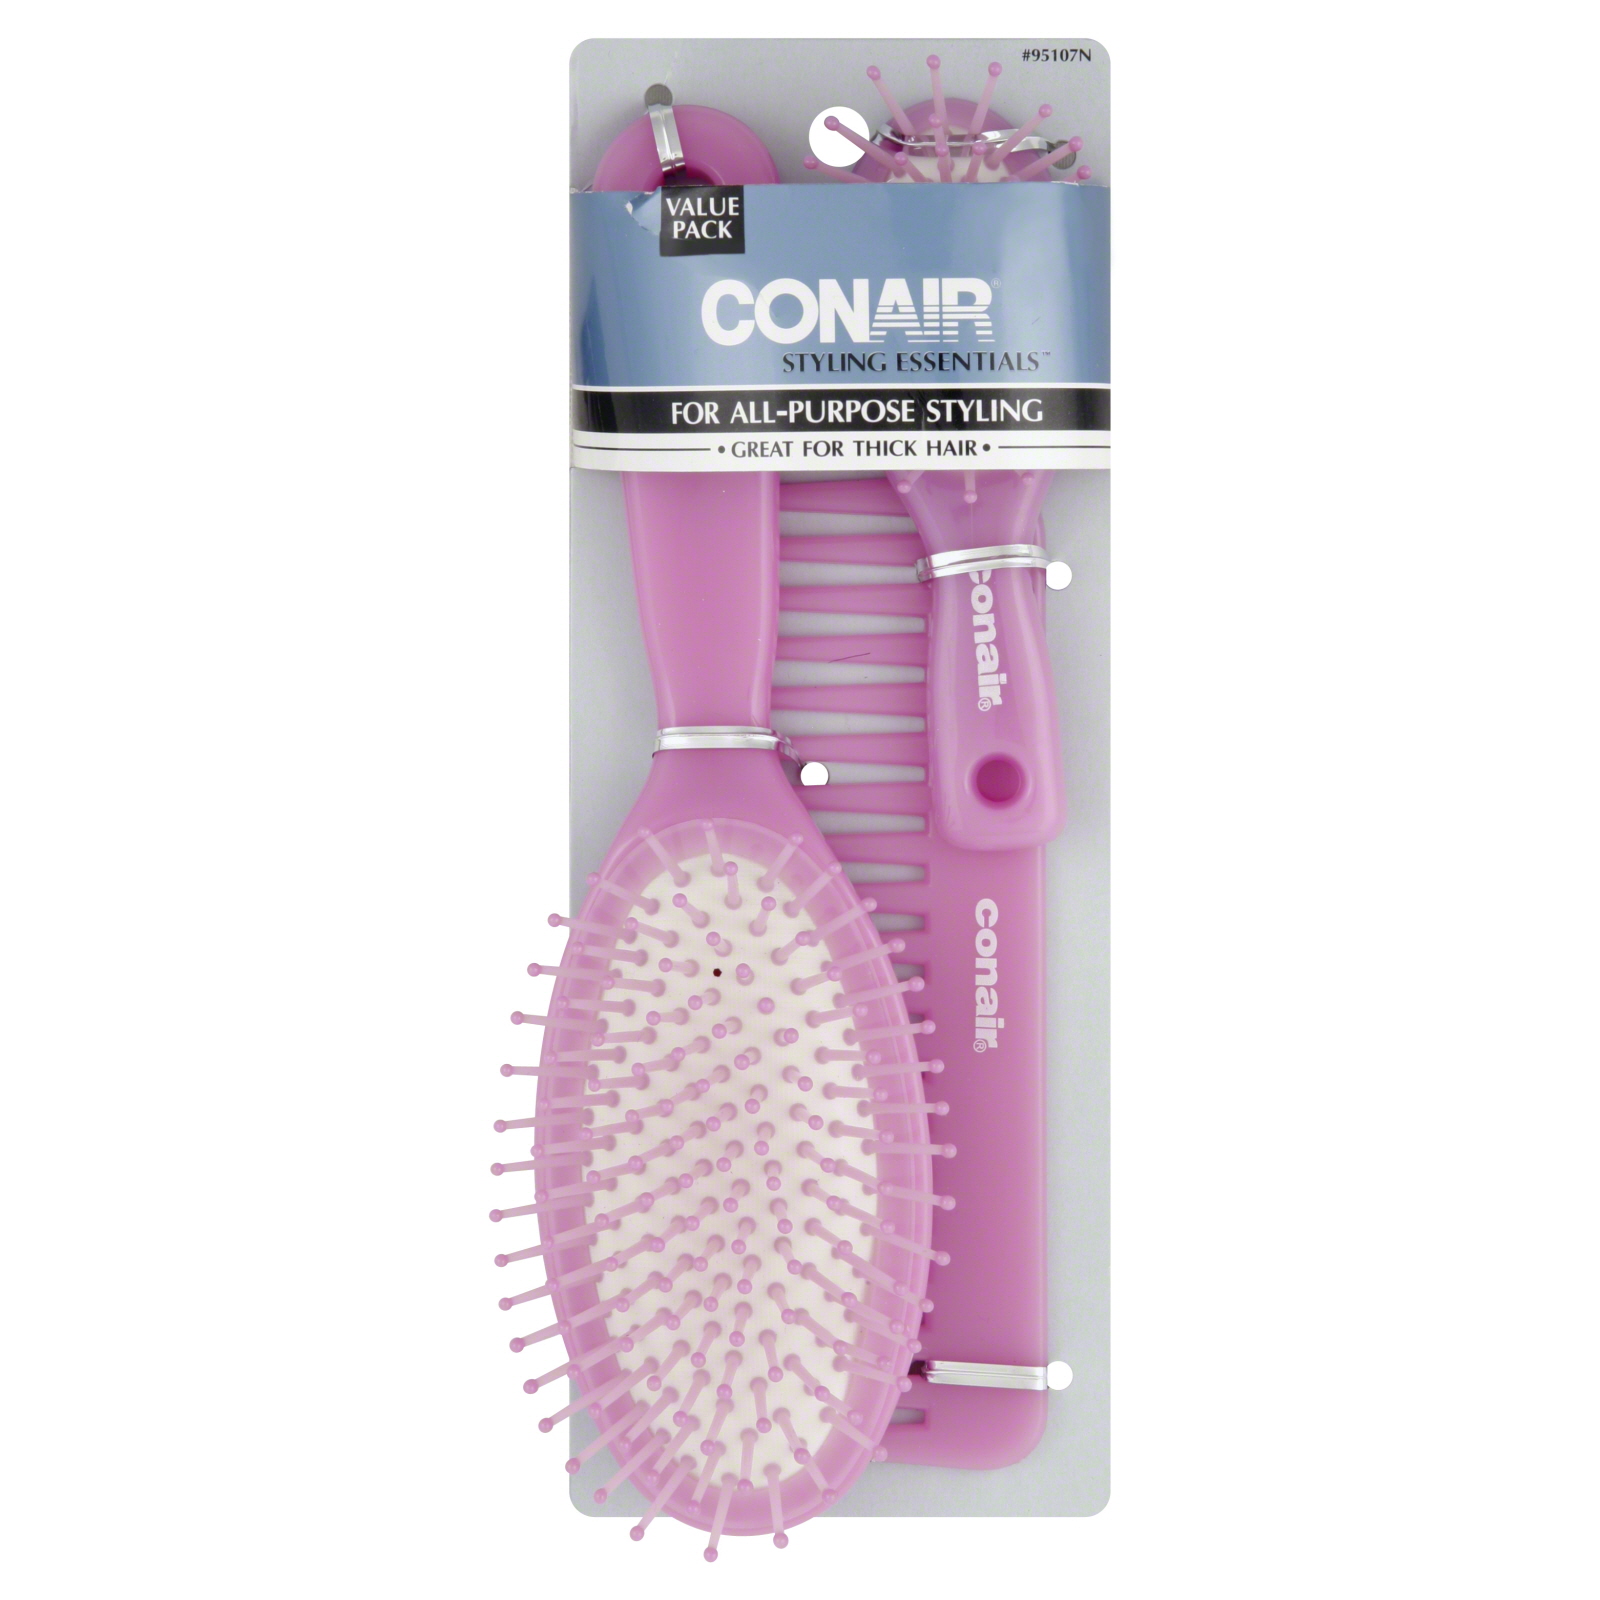 Conair Styling Essentials Brush and Comb Set, 1 set